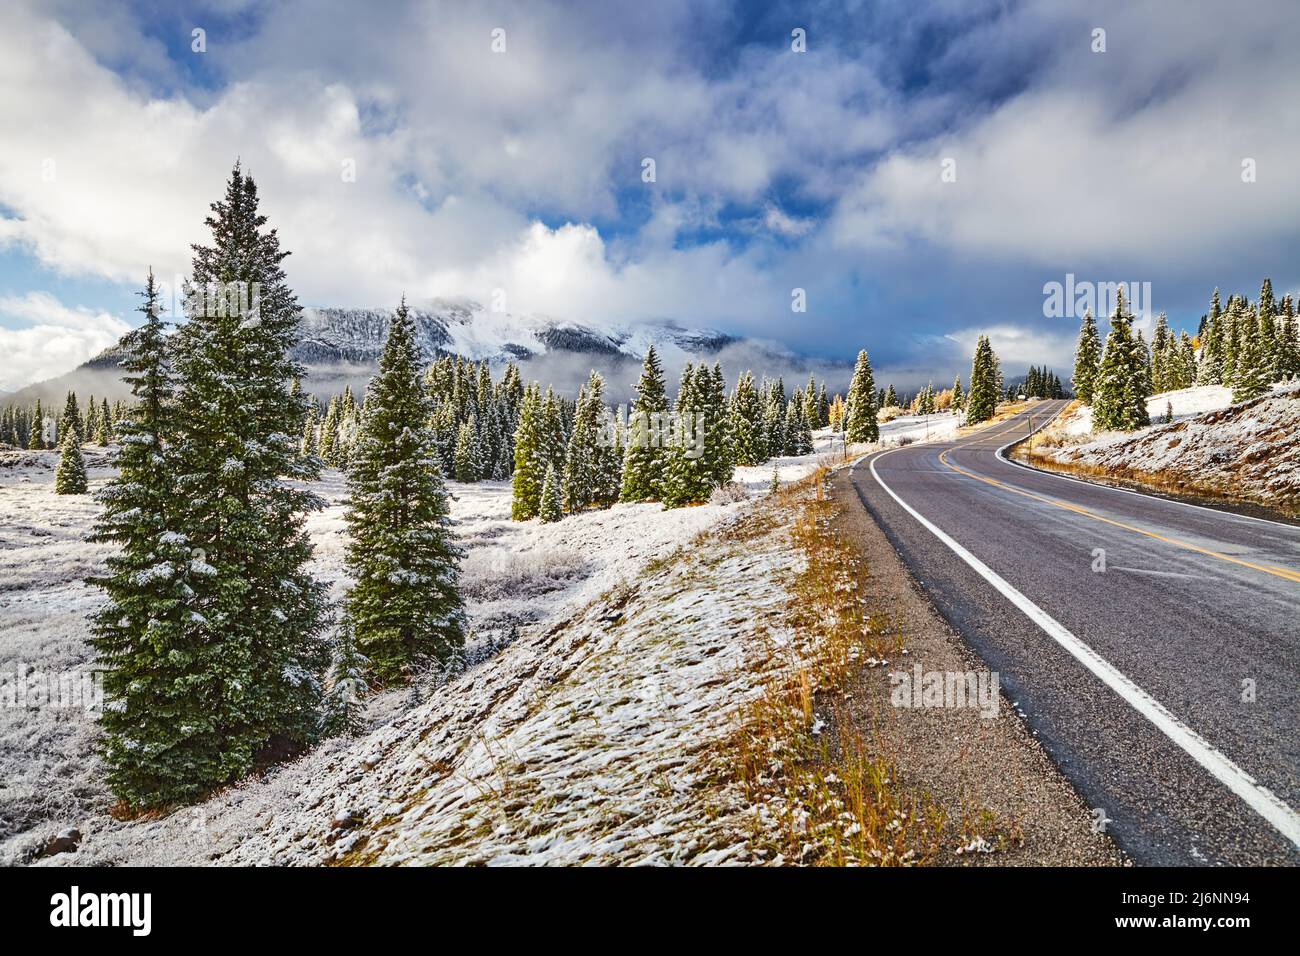 Landscape with snowy mountains and forest, Highway 550, Colorado, USA Stock Photo